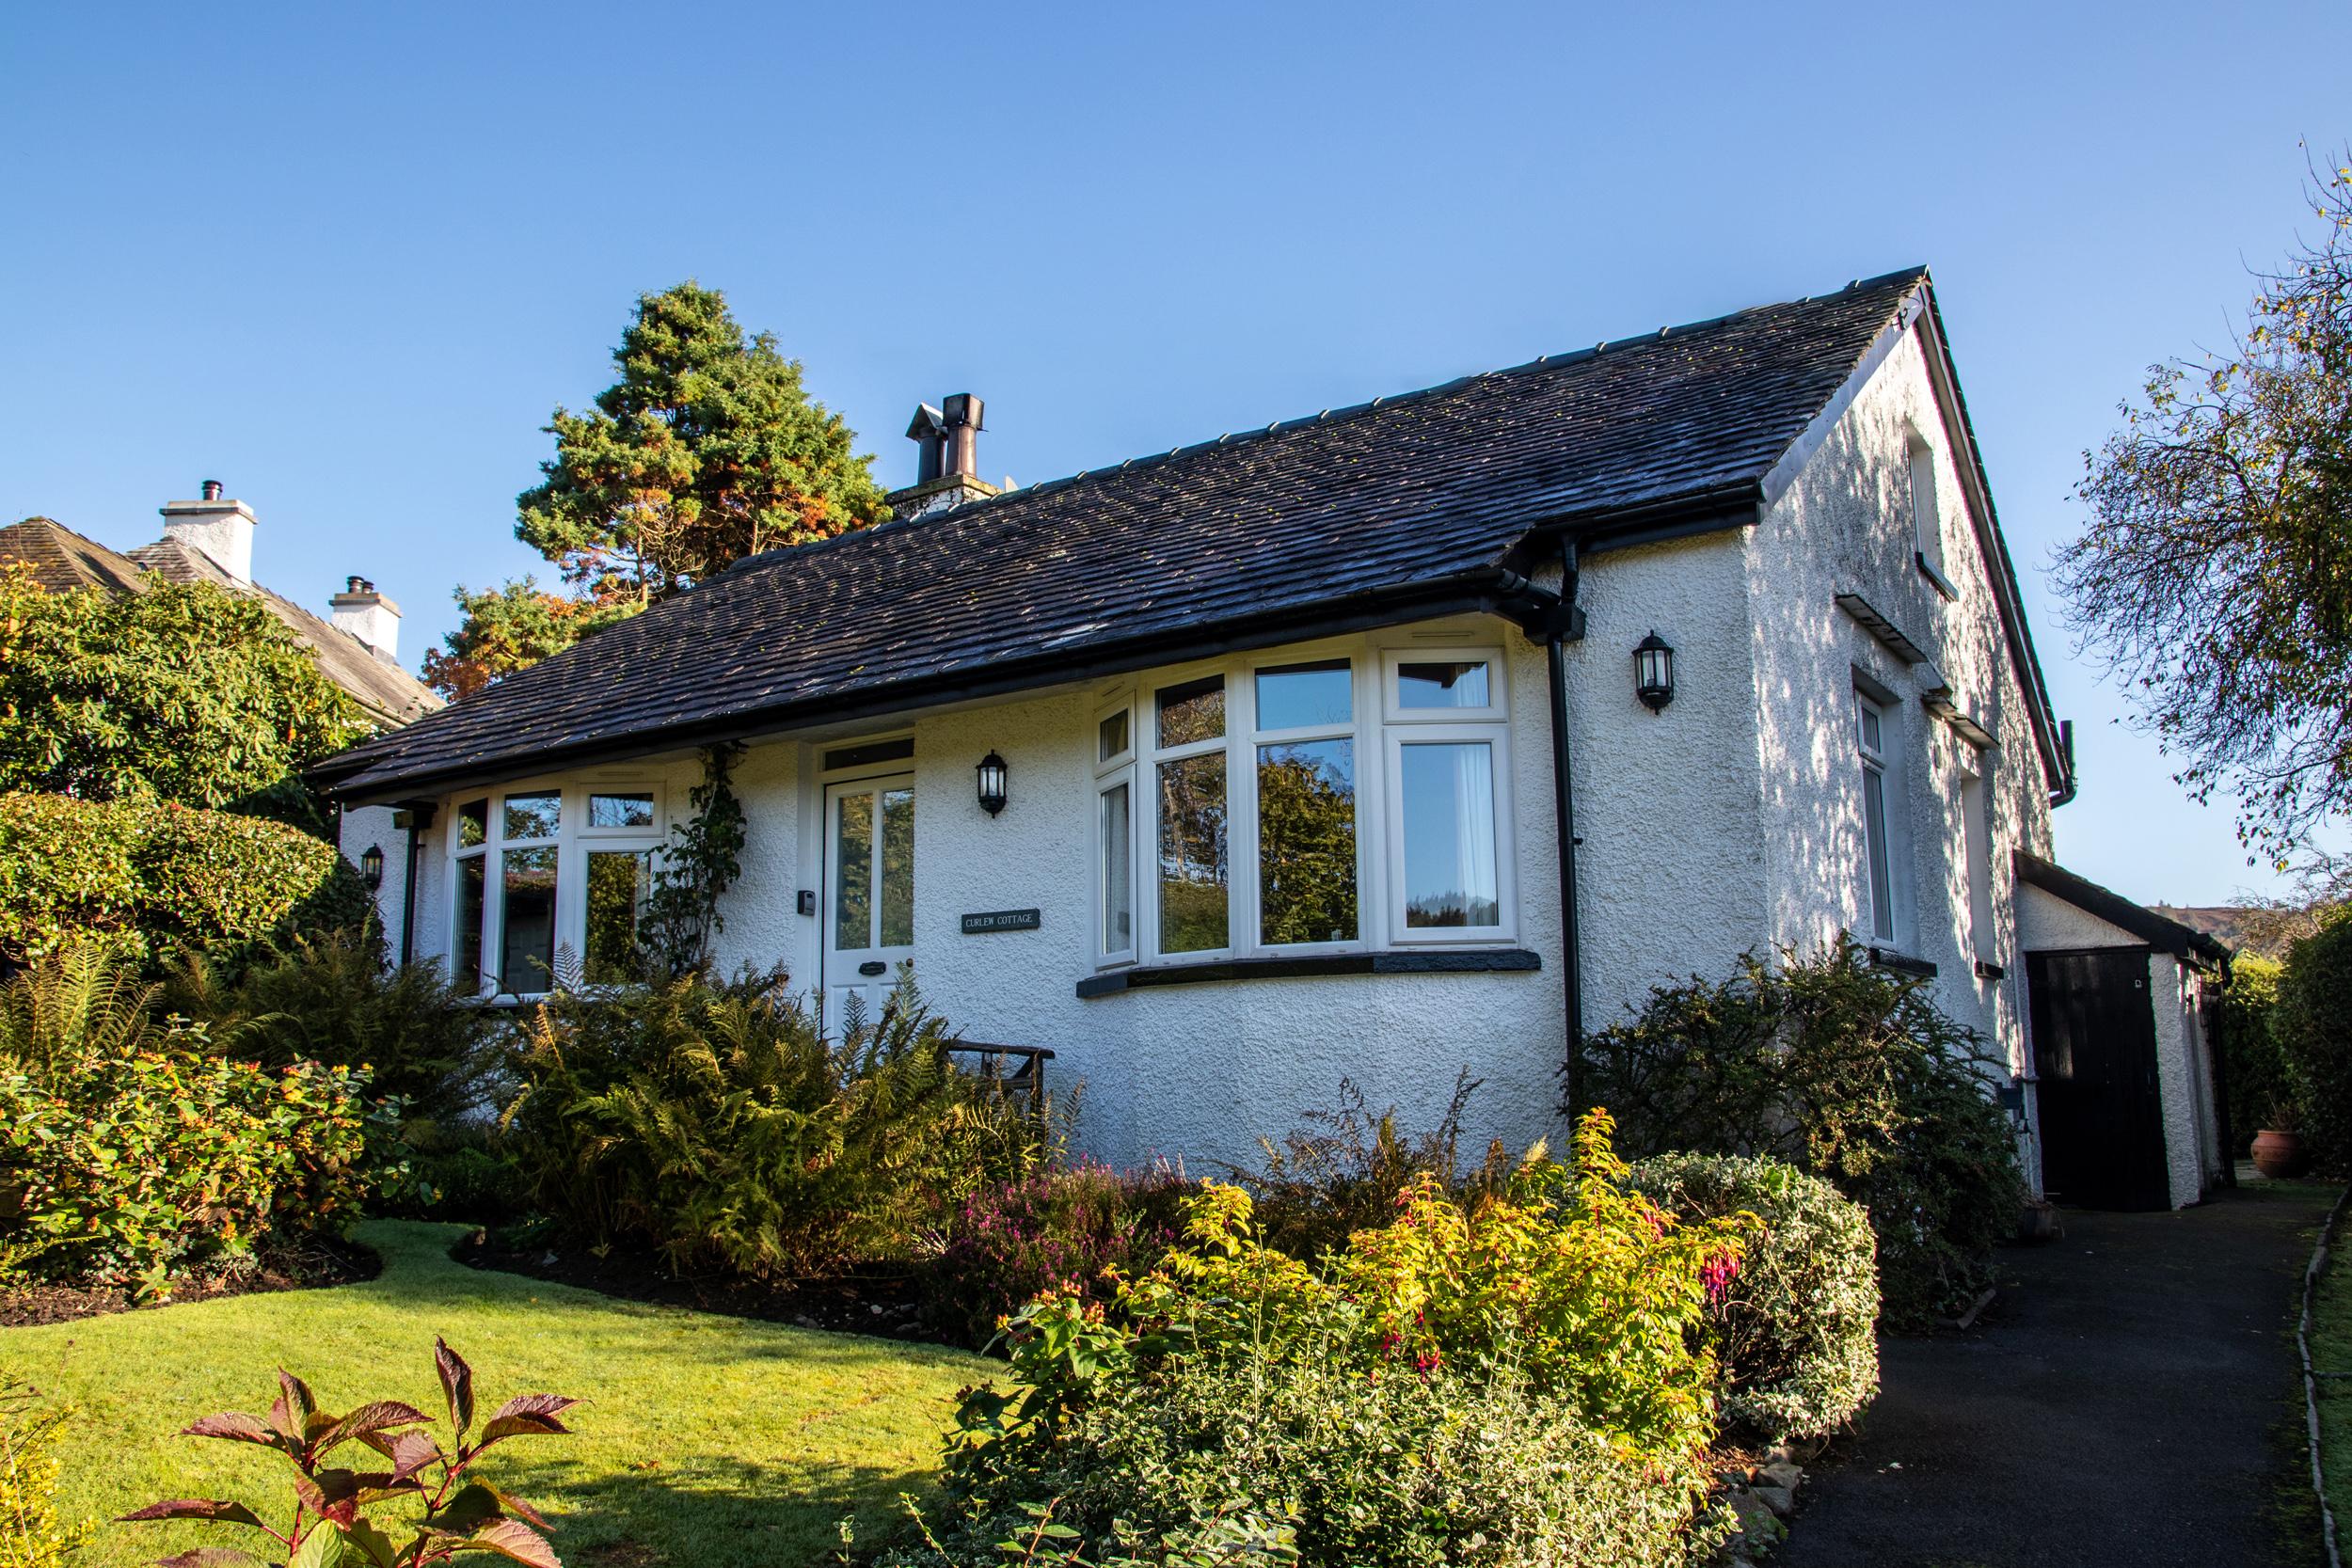 Curlew Cottage at Hawkshead